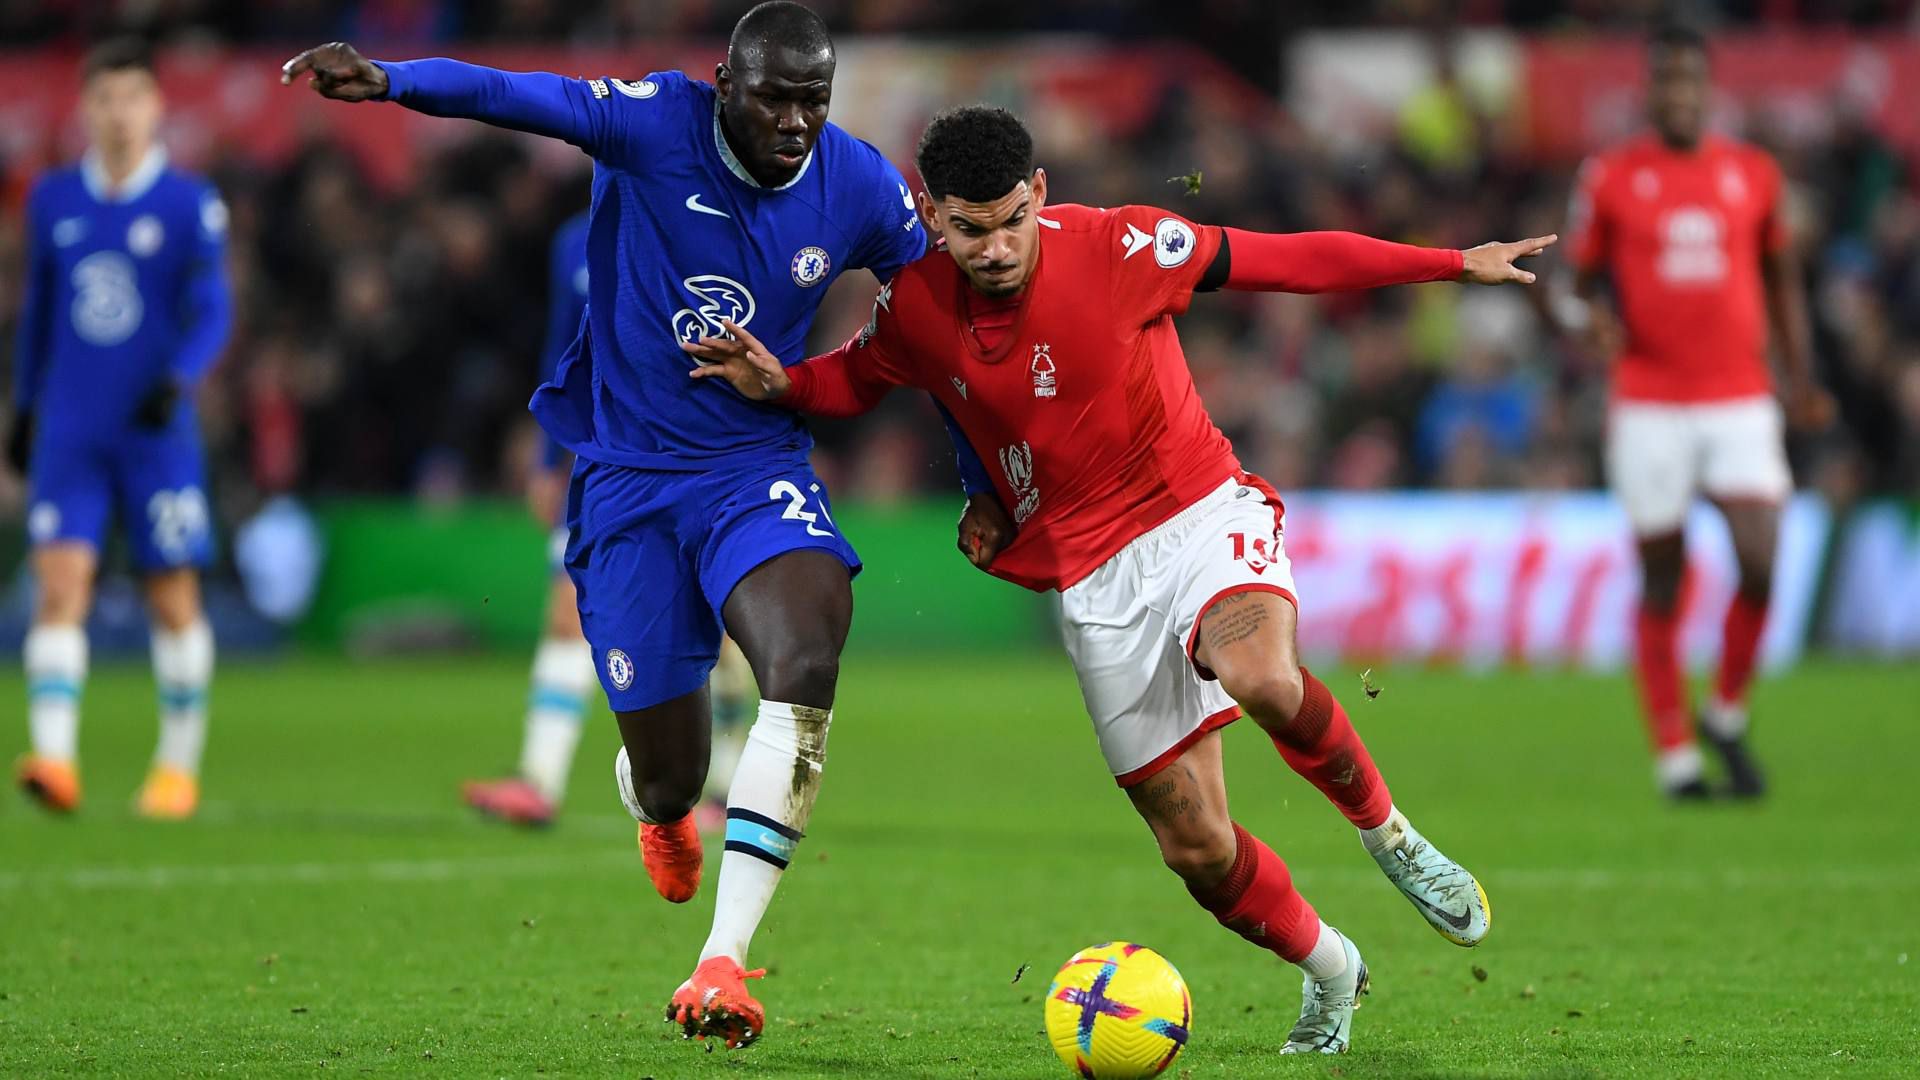 Football Today, January 3, 2023 Chelsea defender Kalidou Koulibaly insists top-four finish is still realistic LiveScore